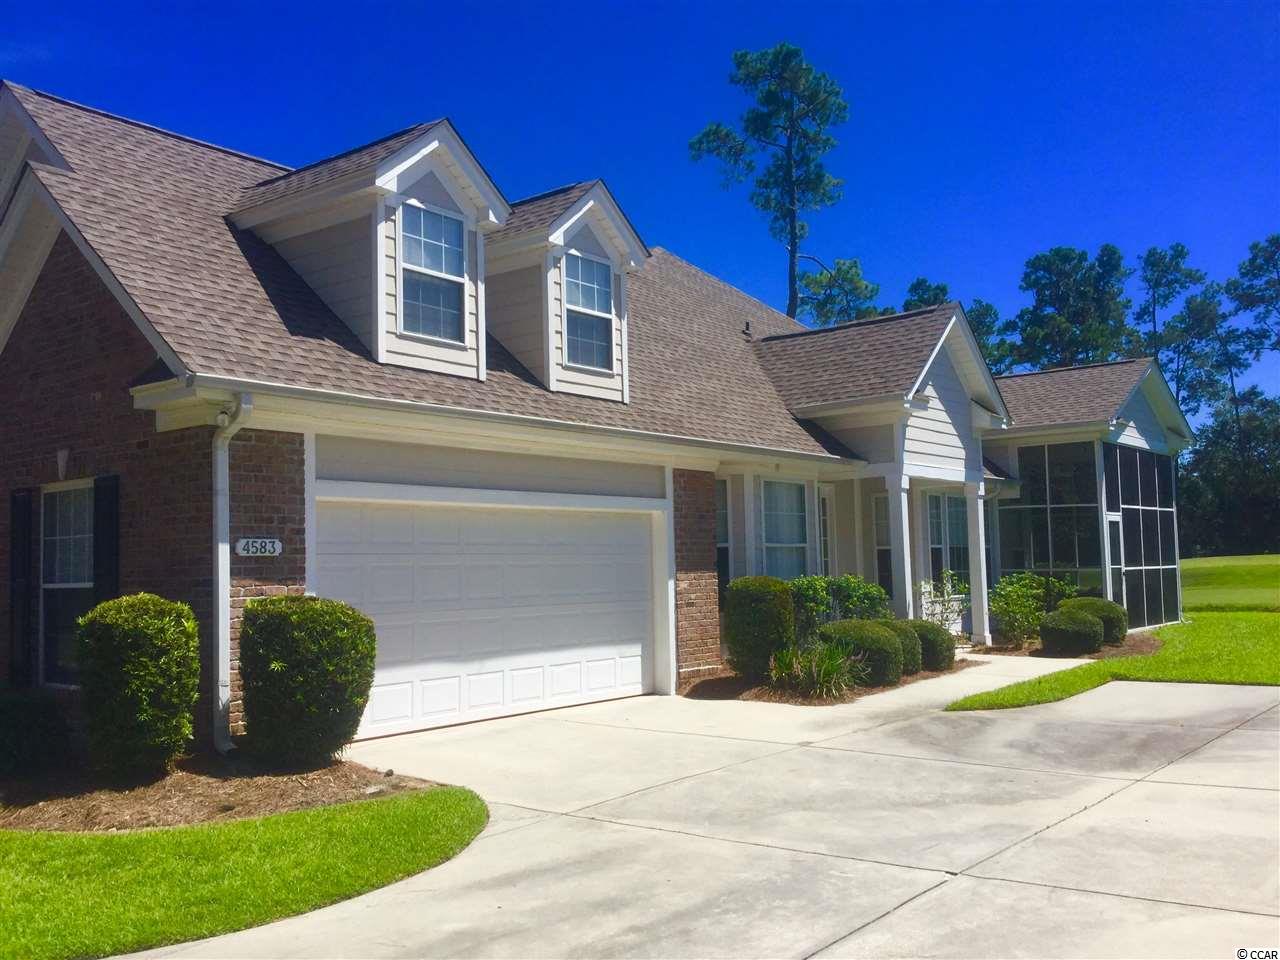 4583 Painted Fern Ct. Murrells Inlet, SC 29576